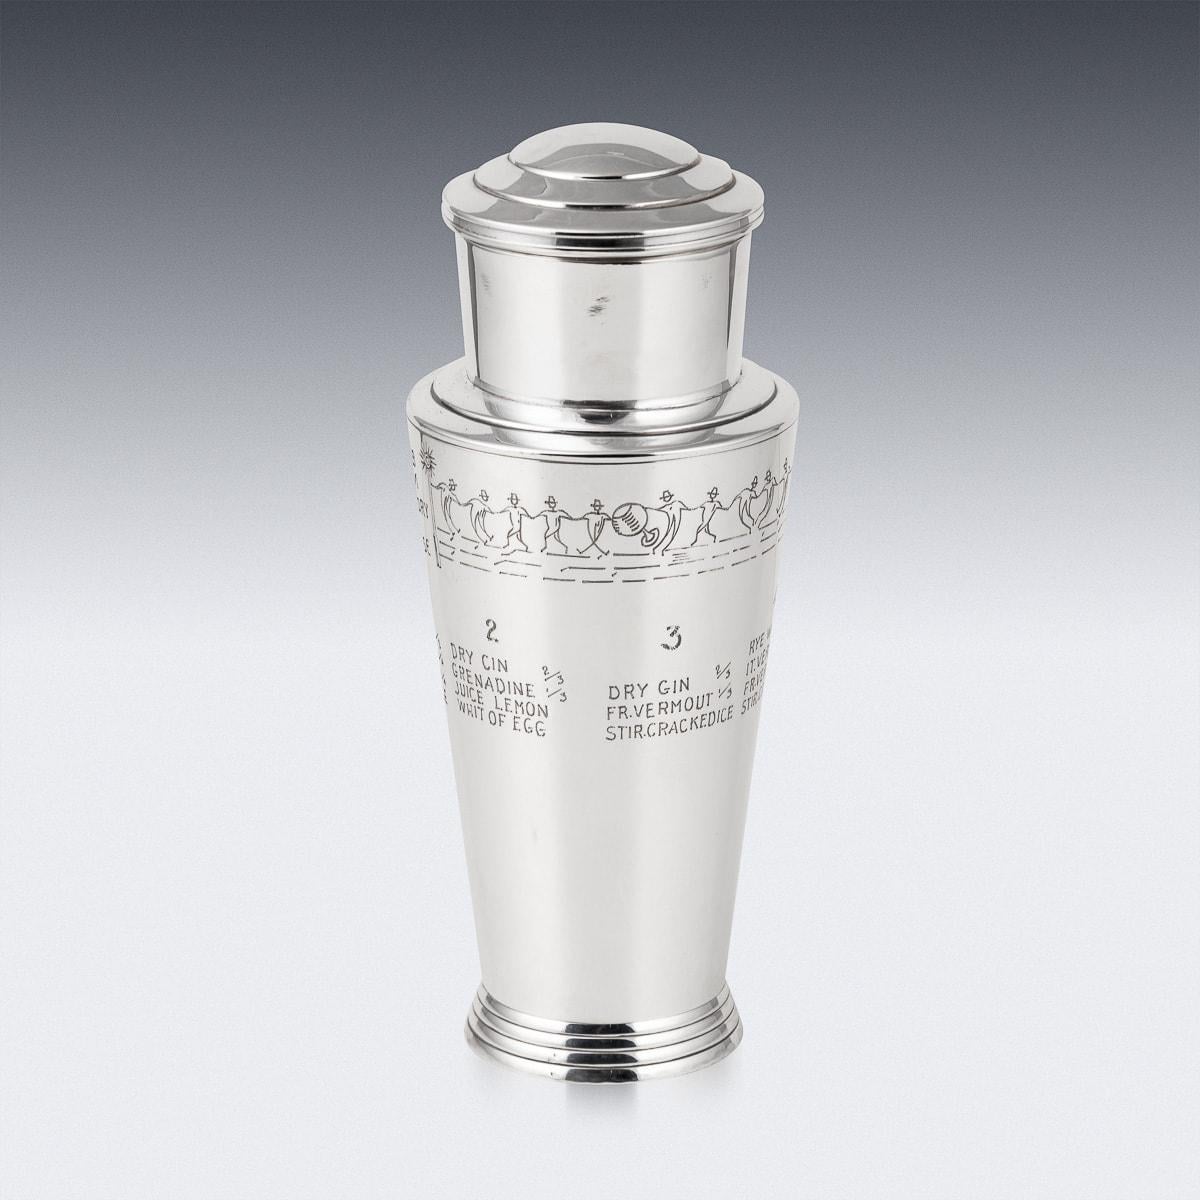 A superb 20th Century classic Art Deco silver plated cocktail shaker, dating back to the 1930's. Designed by Keith Murray for Mappin & Webb. This piece has six cocktail menus engraved around the body, including some rarer American cocktails such as